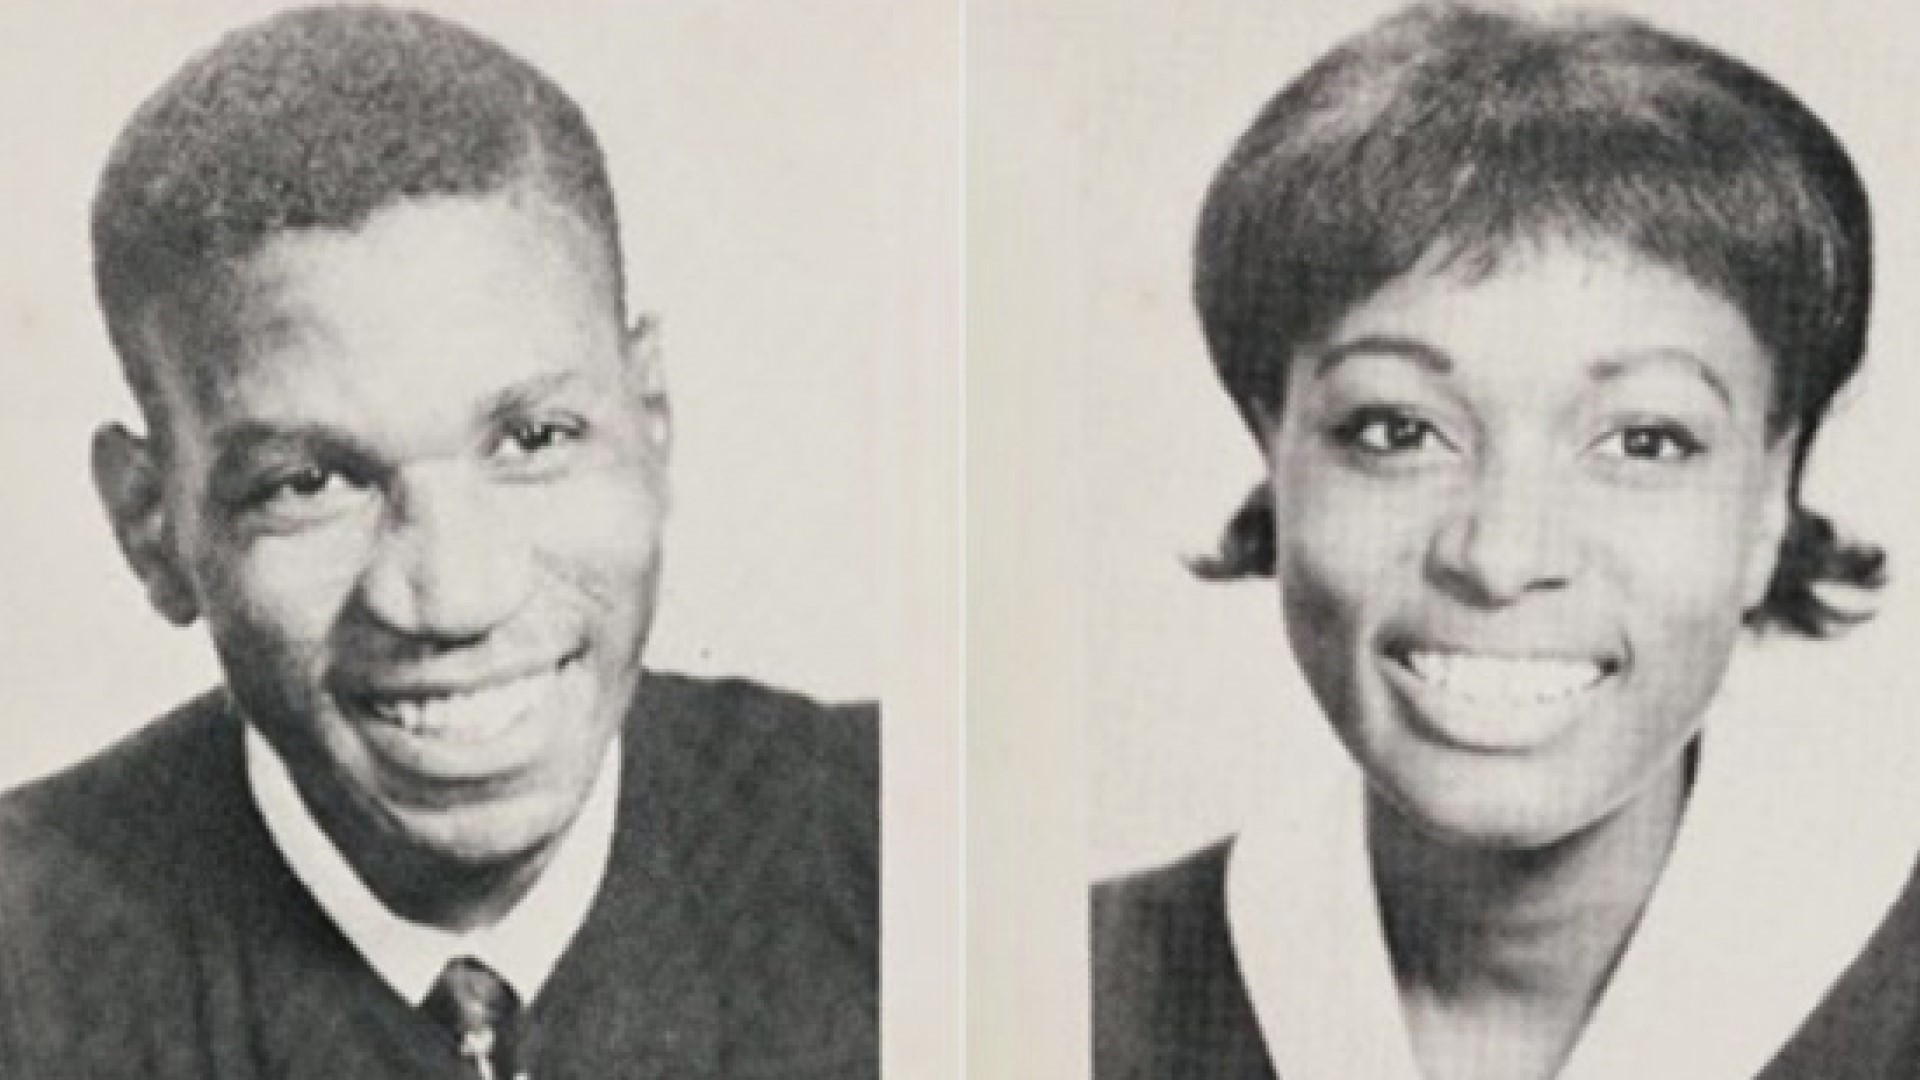 Reverend Robert Gilbert and Mrs. Barbara Walker both graduated from Baylor in 1967. They both broke barriers and made significant impacts in their communities.